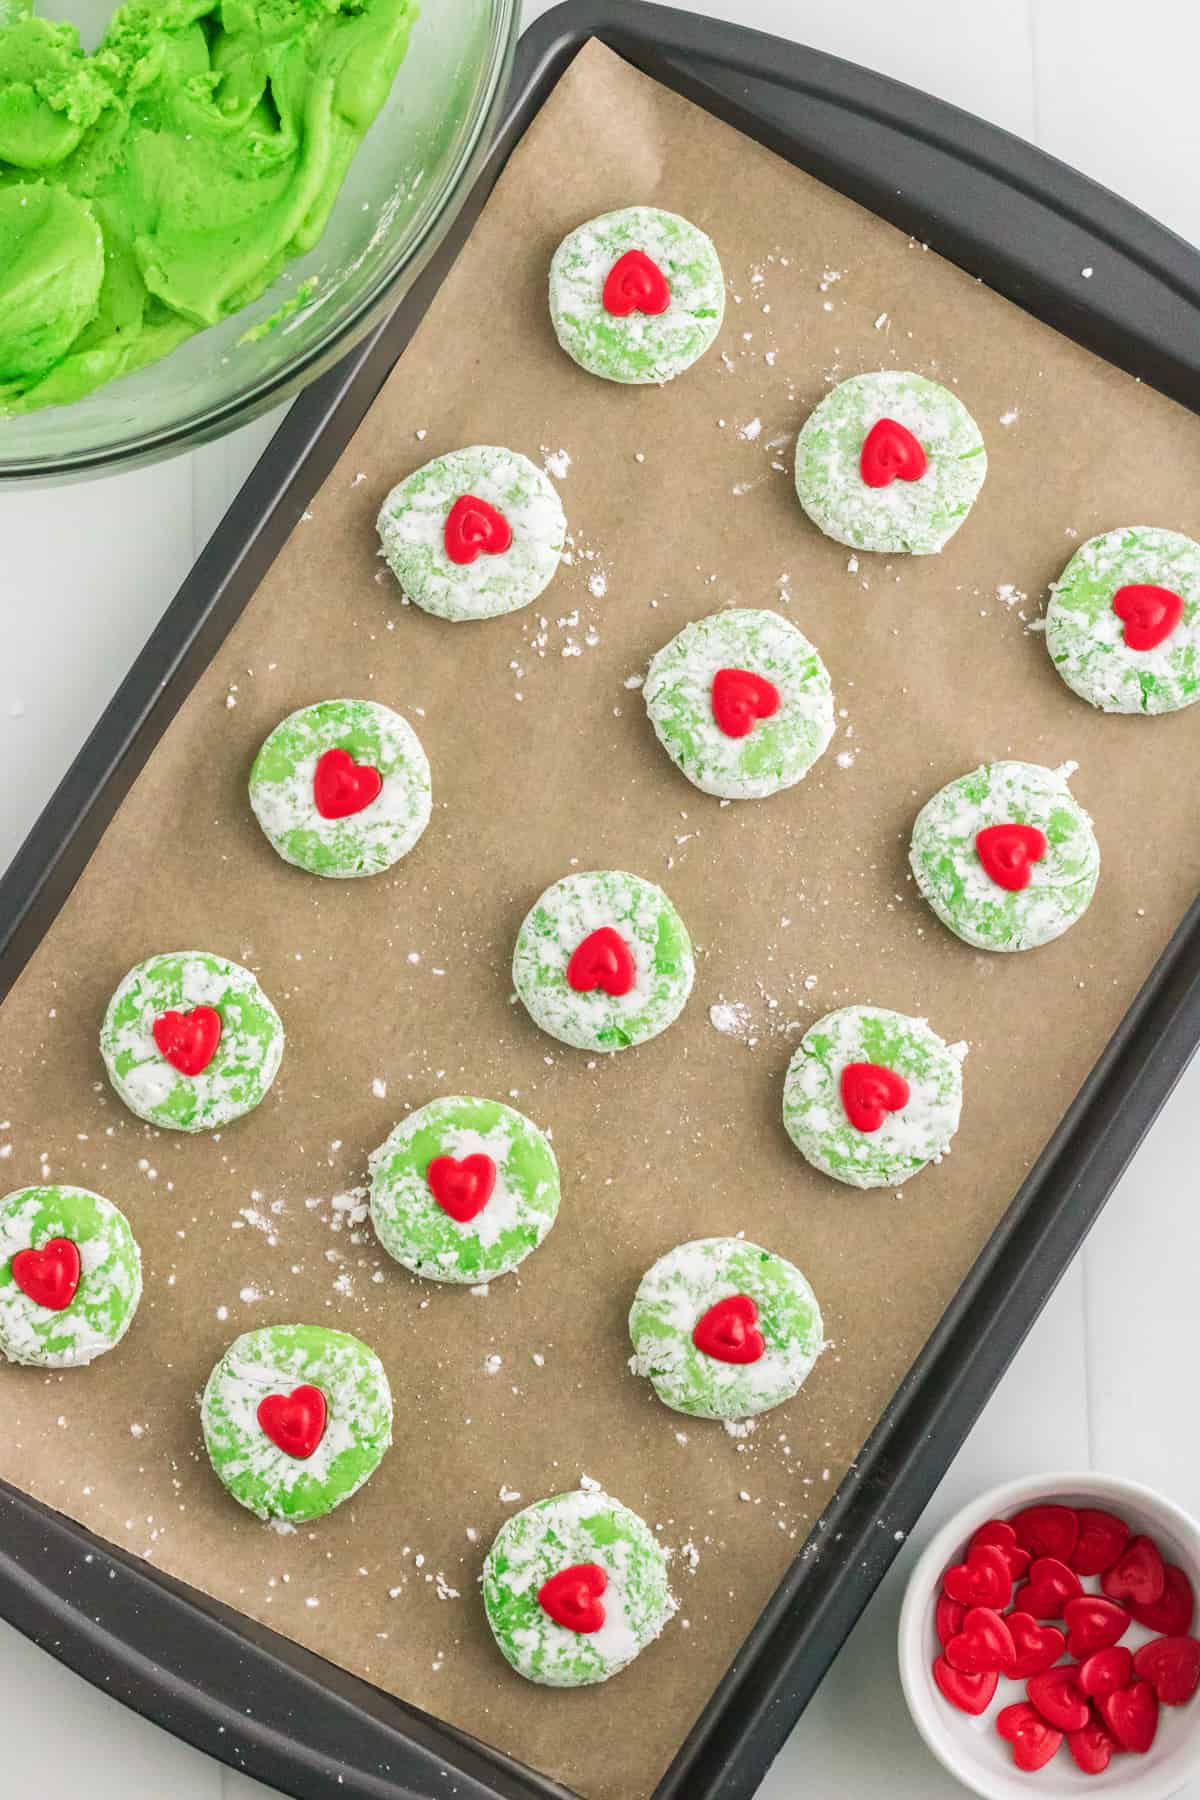 Parchment lined baking sheet with unbaked grinch cookies topped with red hearts